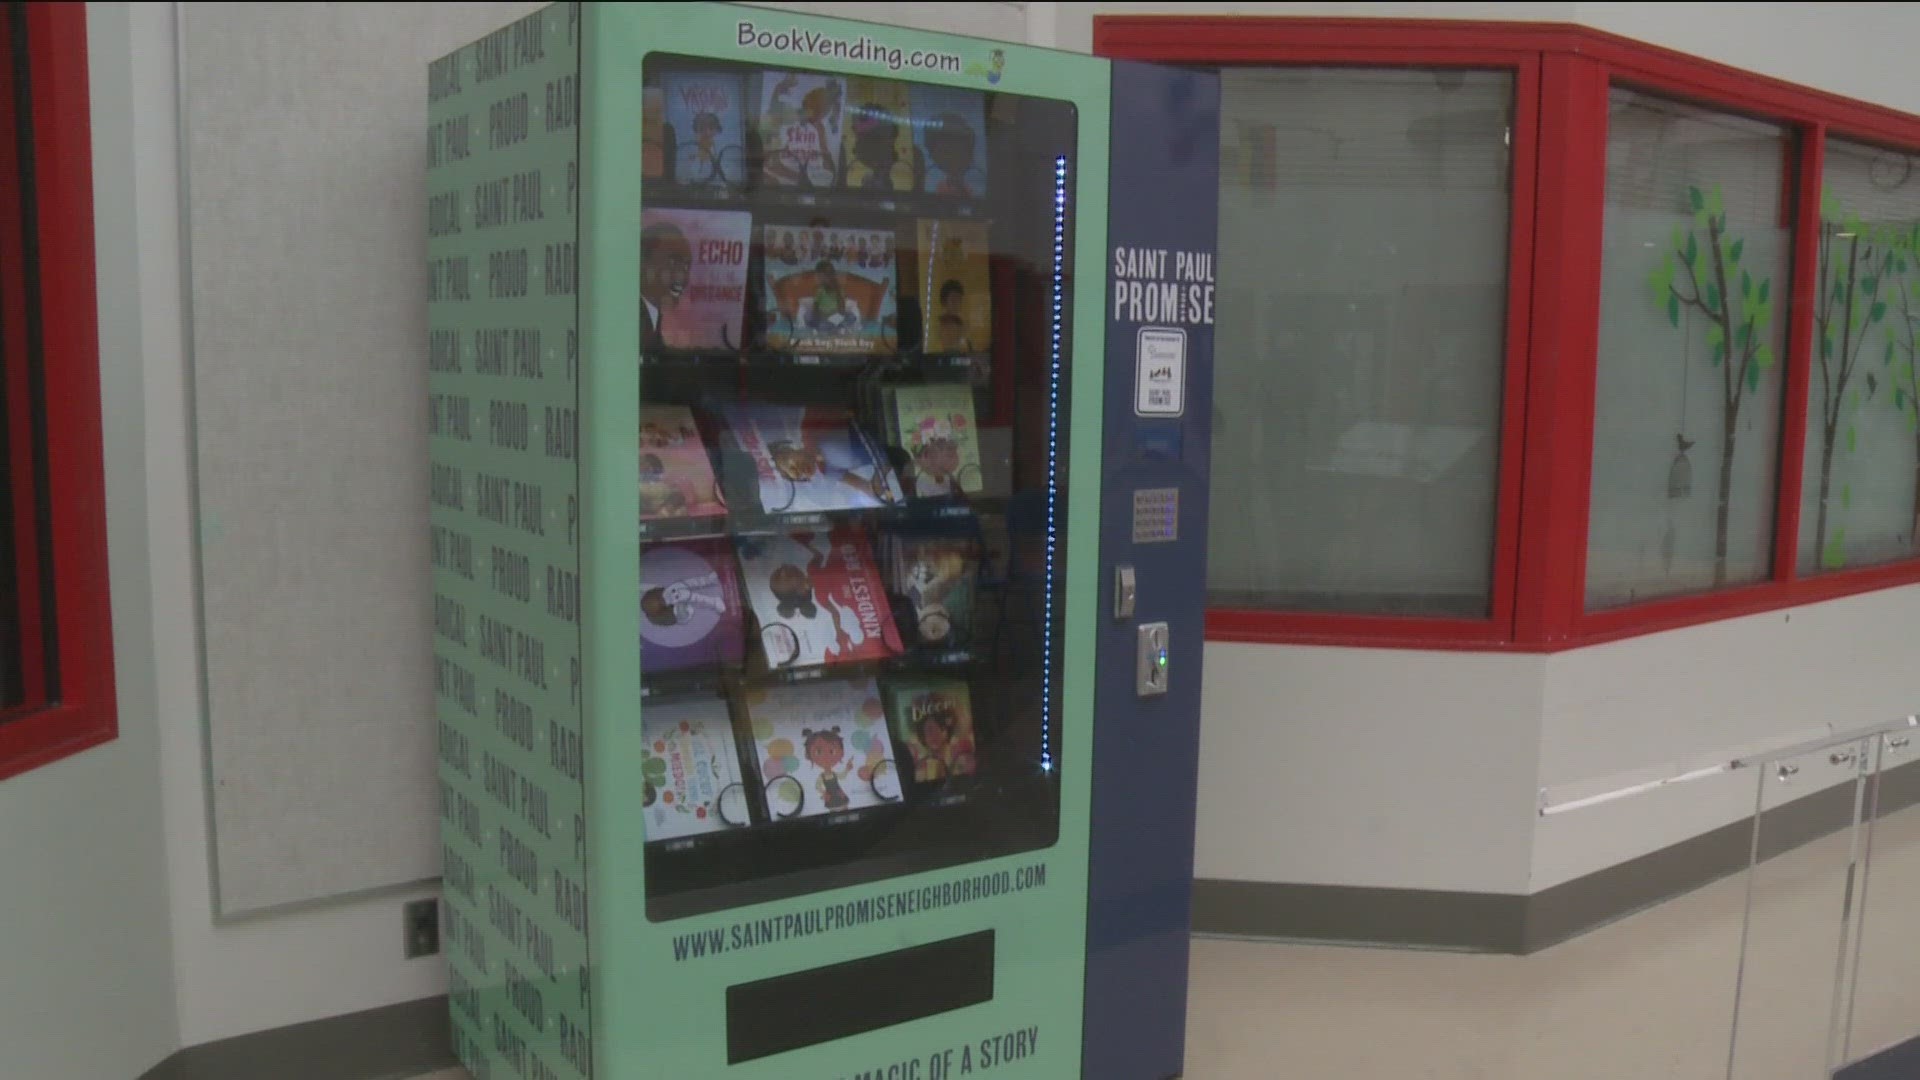 Inspiring children to read can come from parents, friends — or even a vending machine.